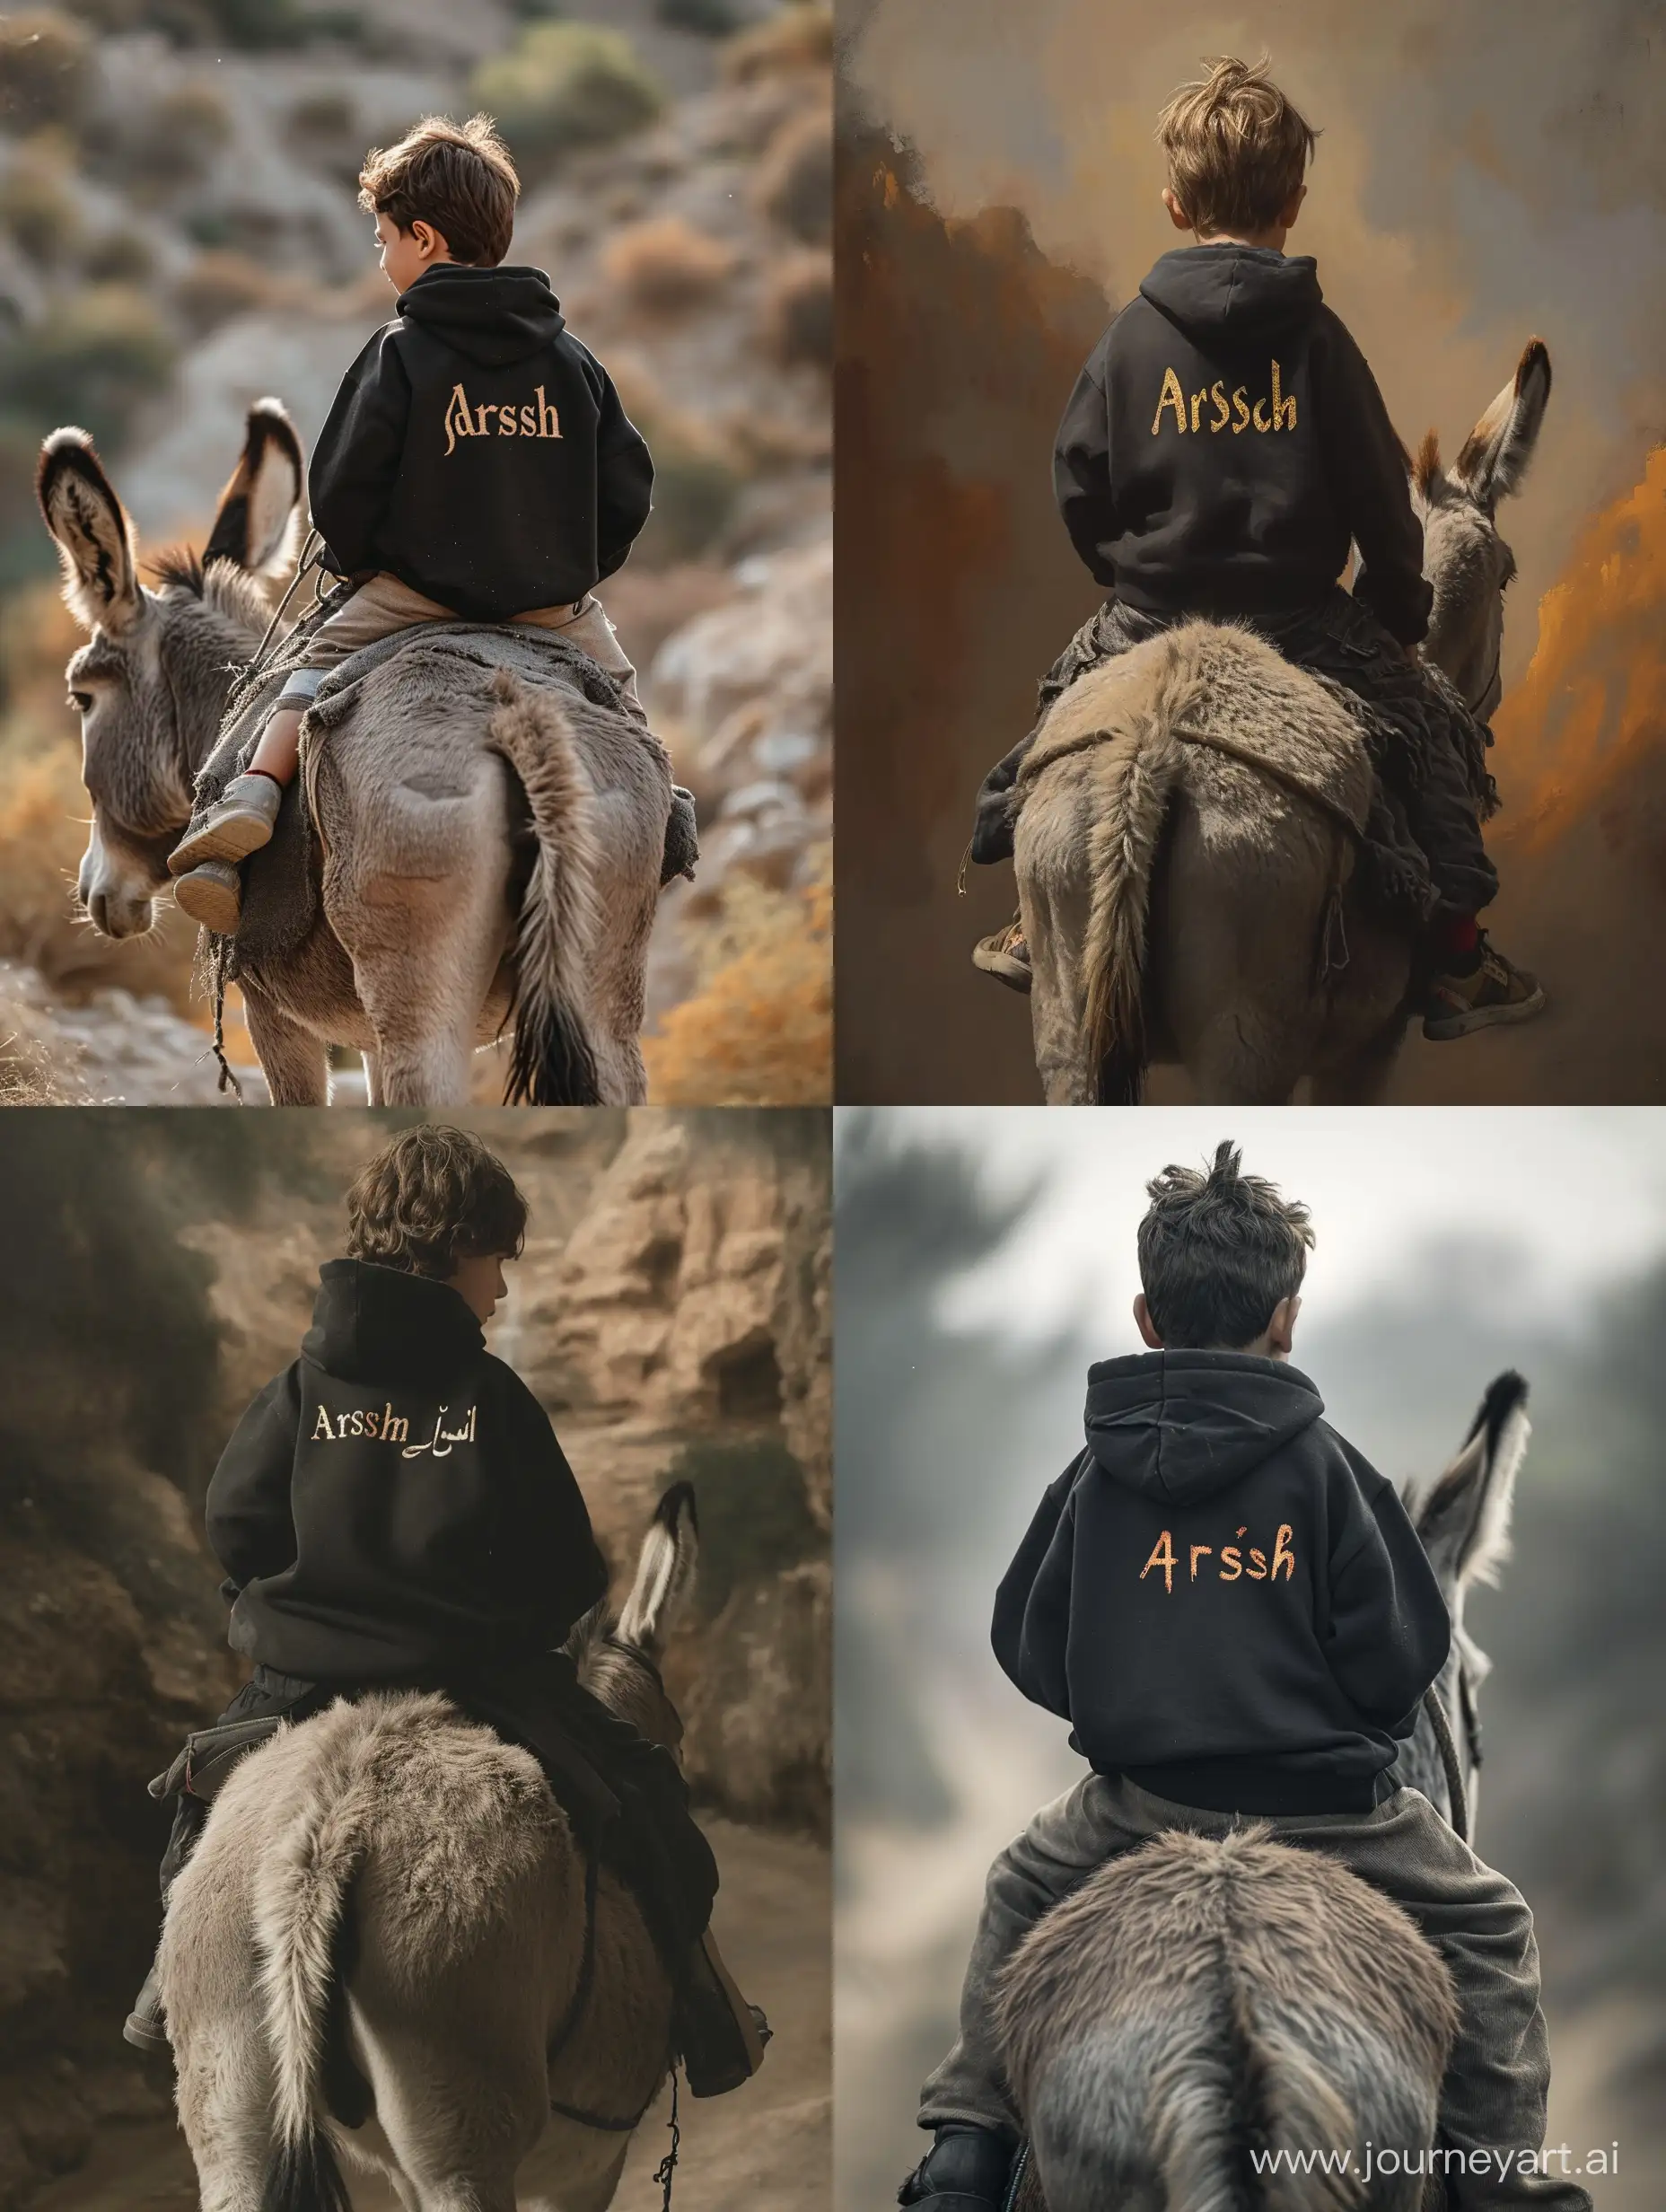 Young-Boy-Riding-Donkey-in-Stylish-Black-Hoodie